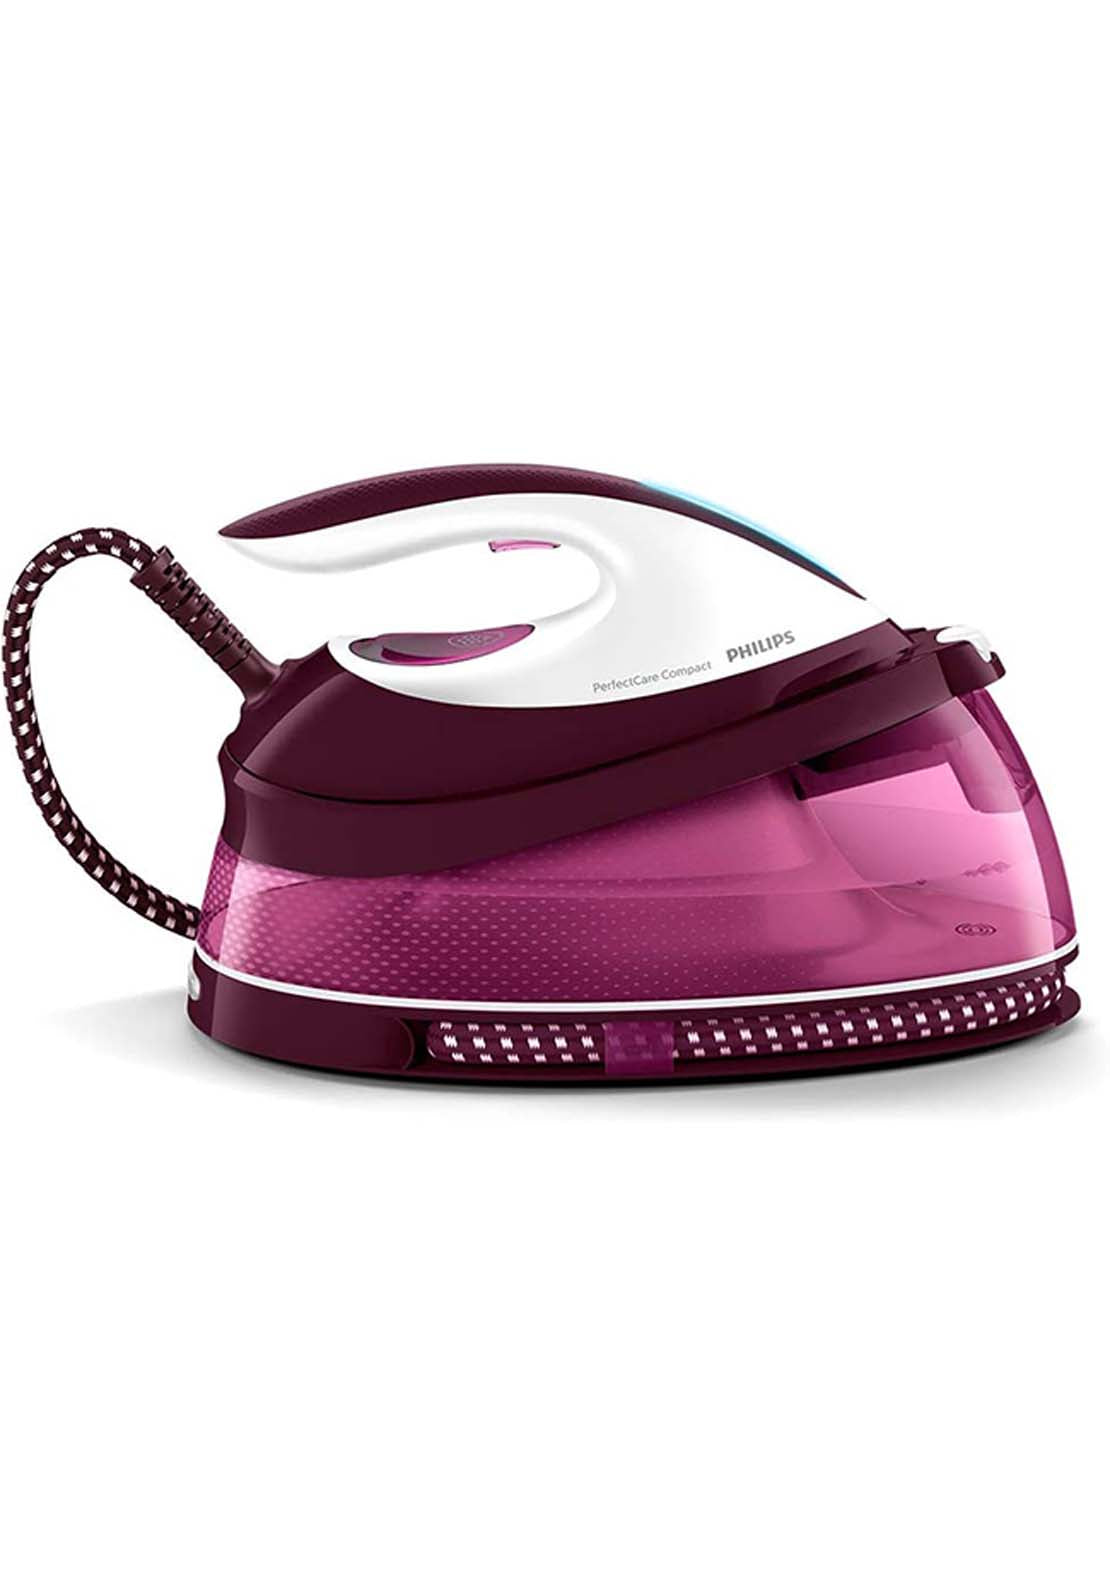 Philips PerfectCare Steam Iron | Gc784246 1 Shaws Department Stores